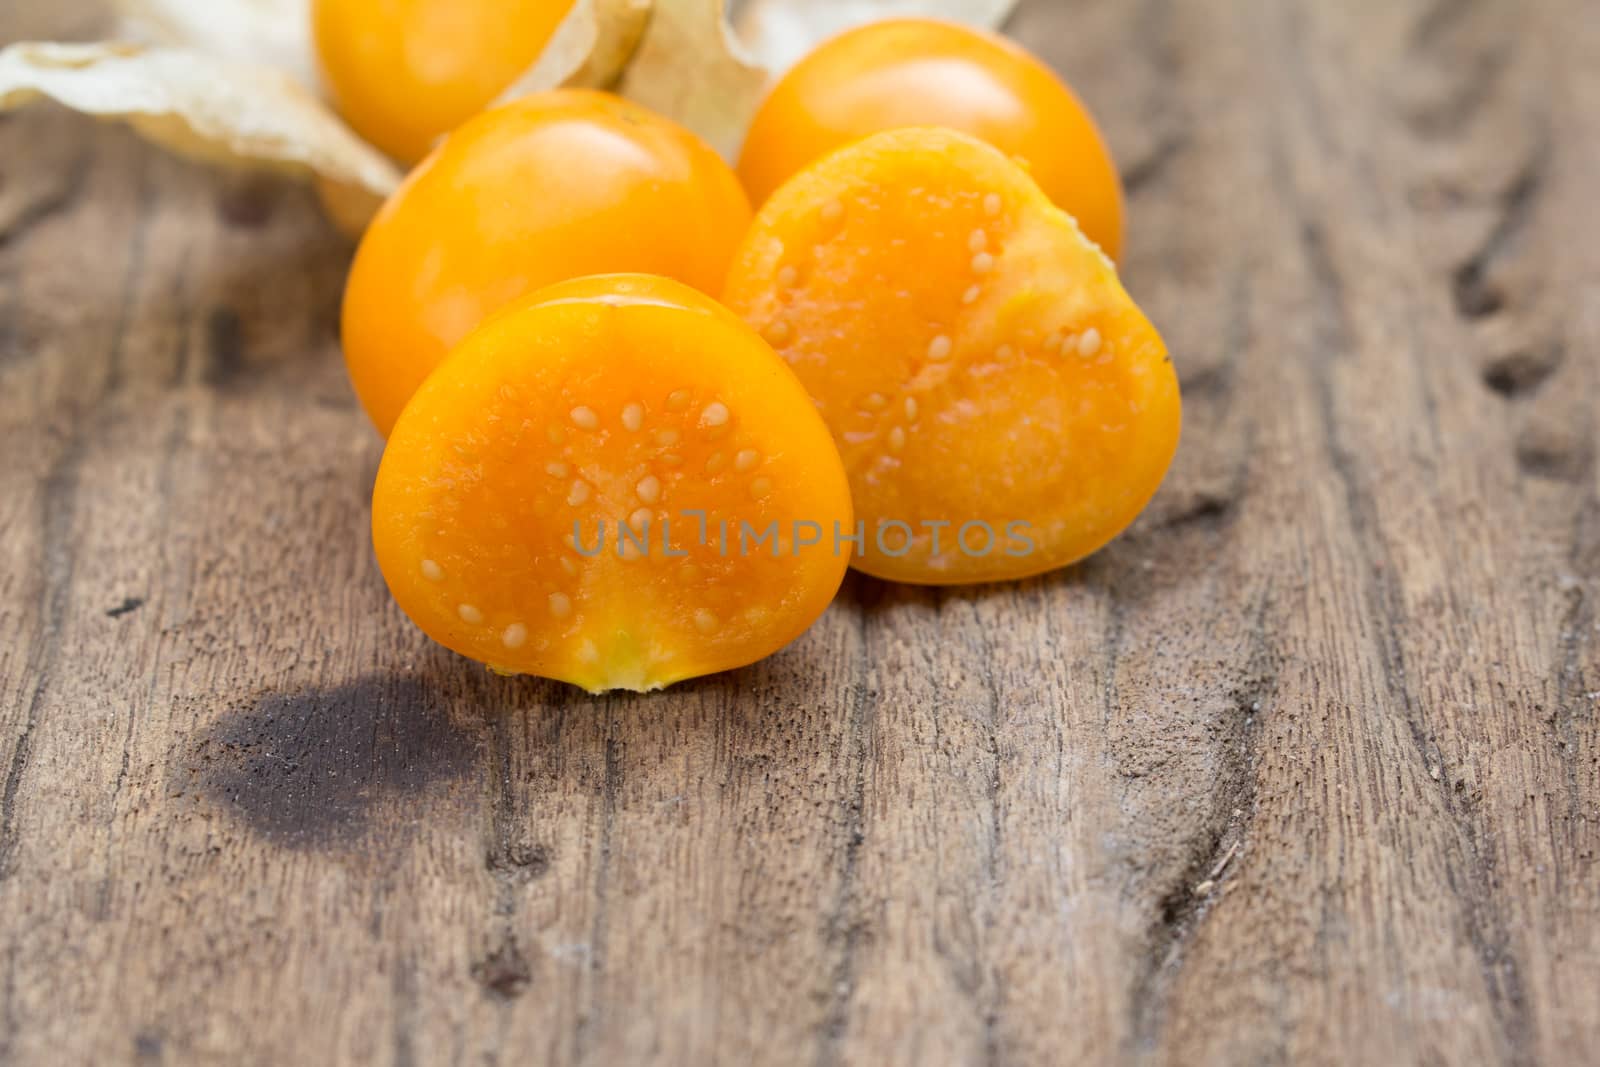 Cape gooseberry, physalis on wood background.